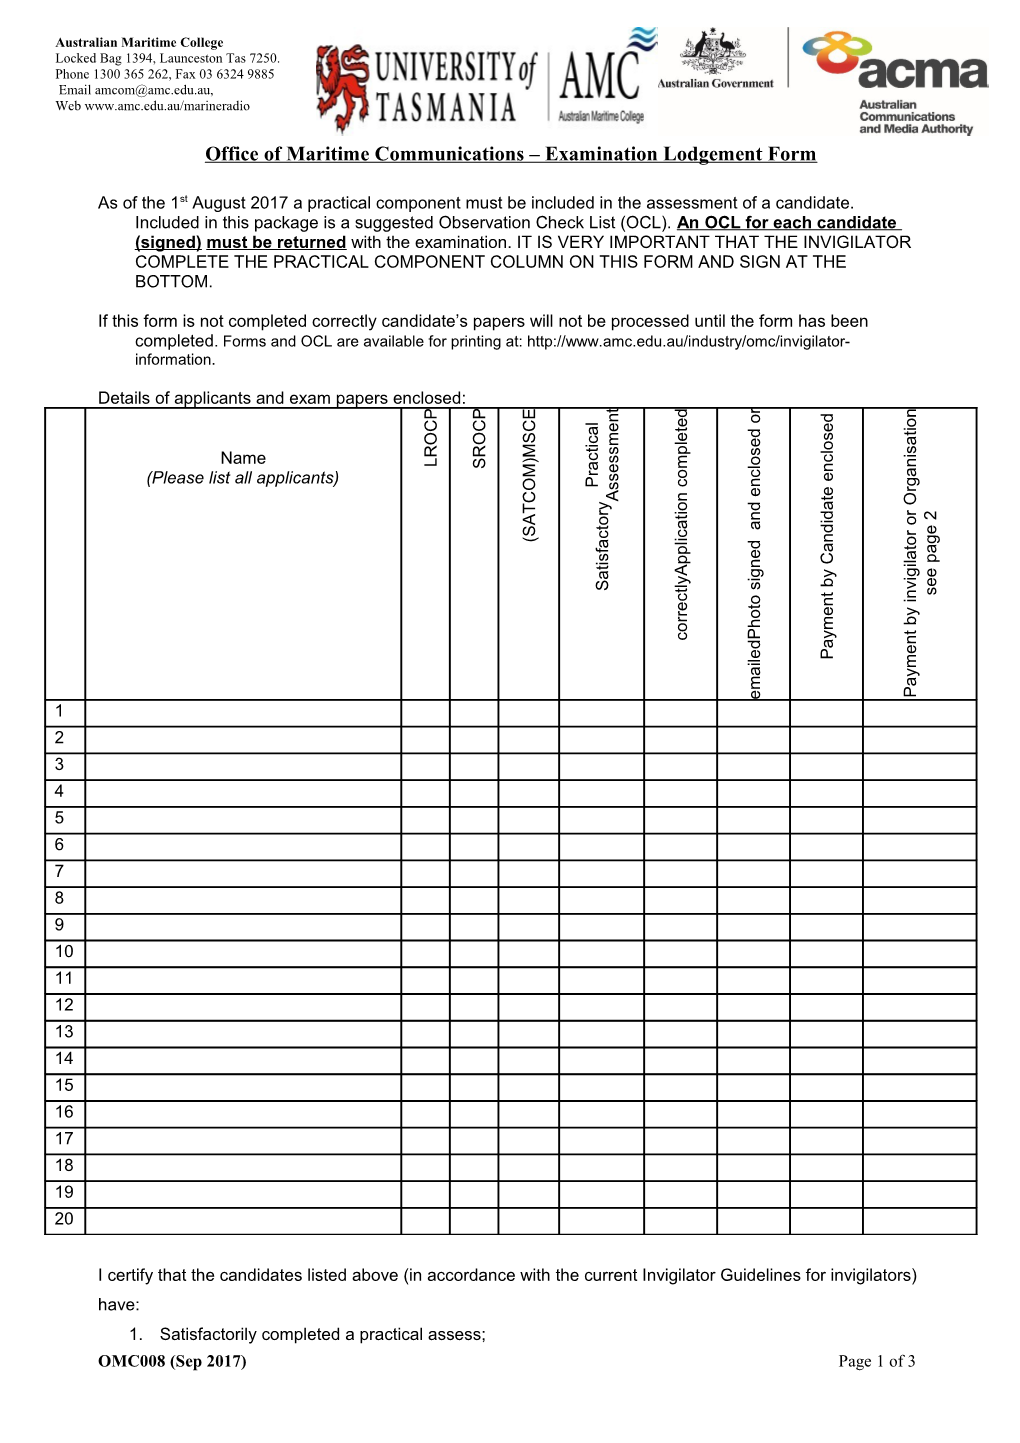 Office of Maritime Communications Examination Lodgement Form